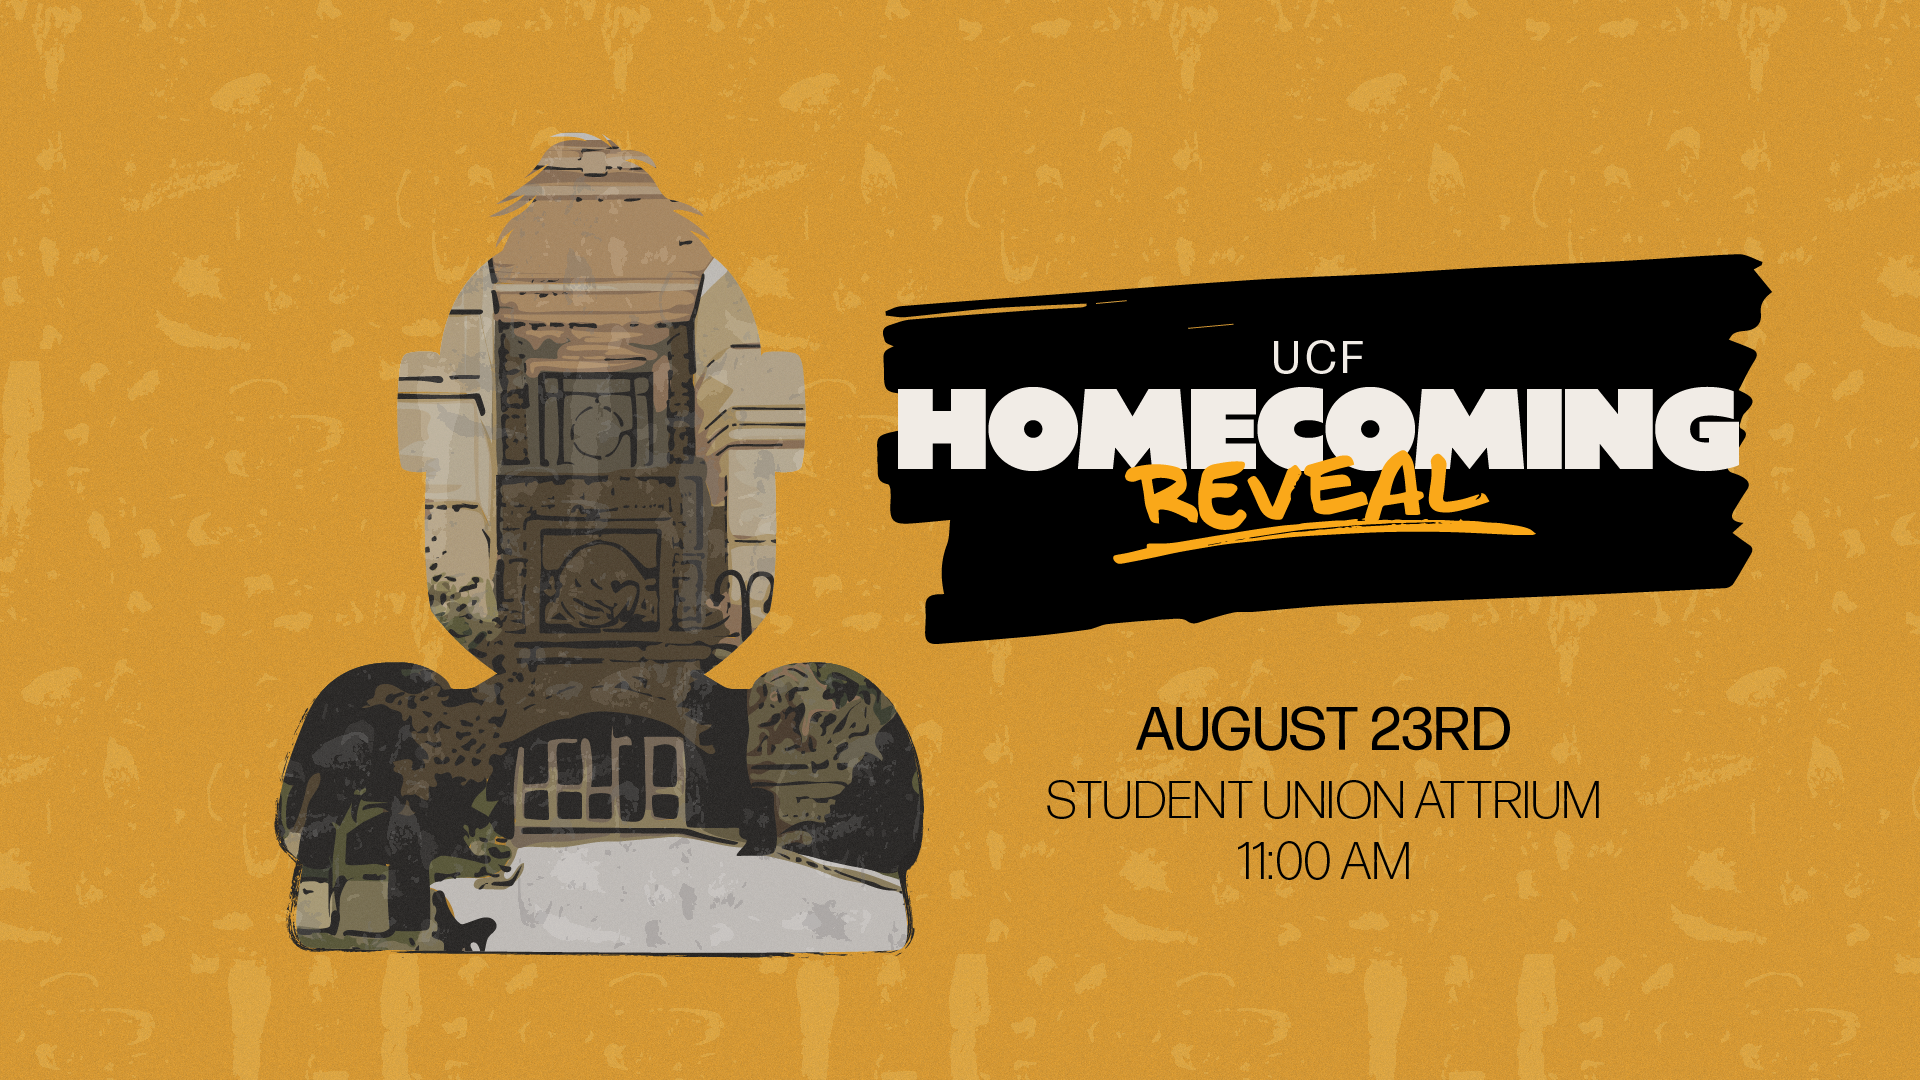 Illustration of UCF mascot's silhouette on the left and the following text on the right: UCF Homecoming Reveal; August 23rd, Student Union Attrium; 11am